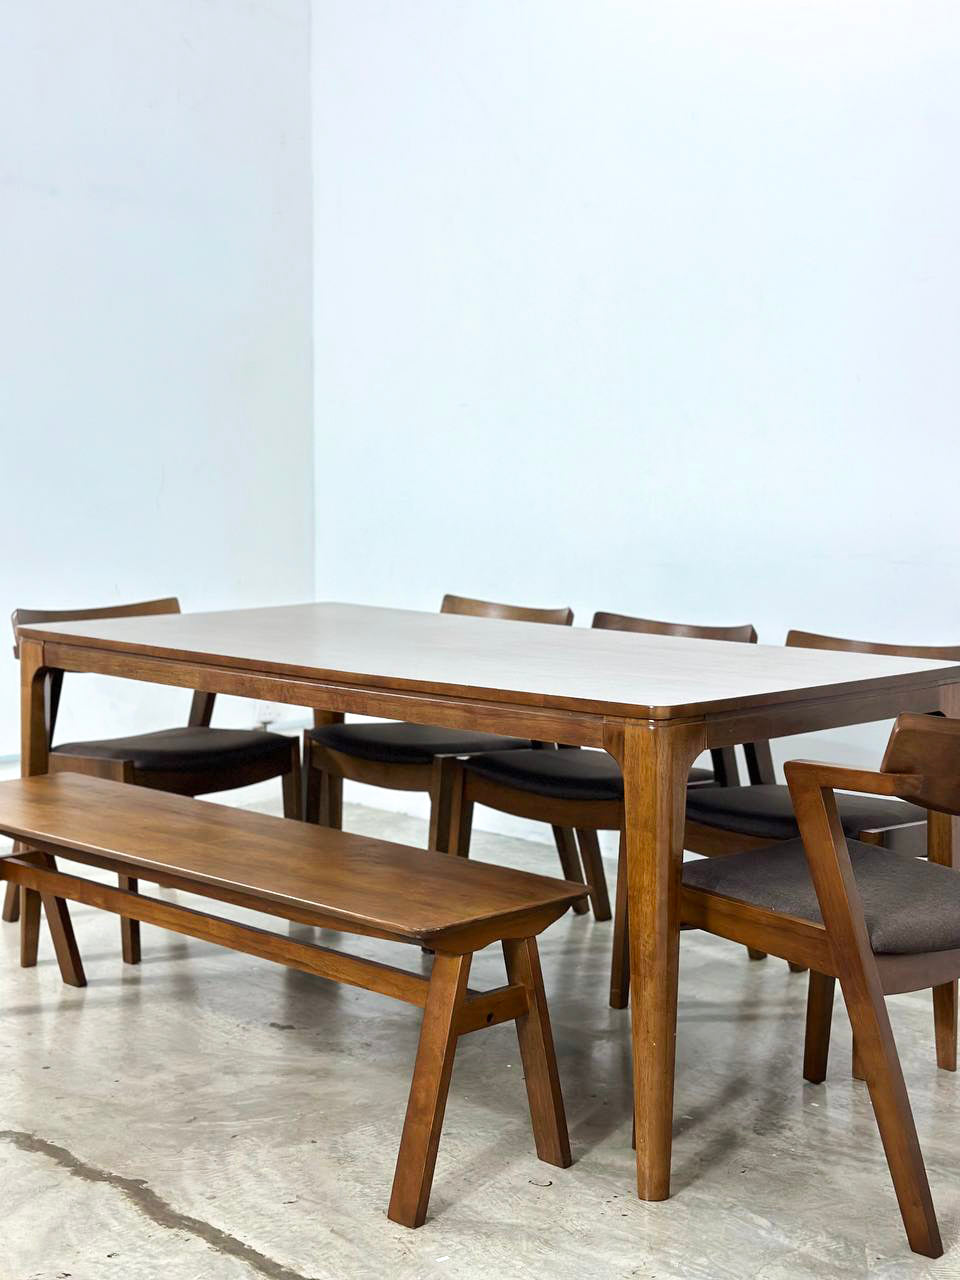 Walnut 1.8m Dining Table with 5 Zoey Chairs + 1.5m Wooden Bench